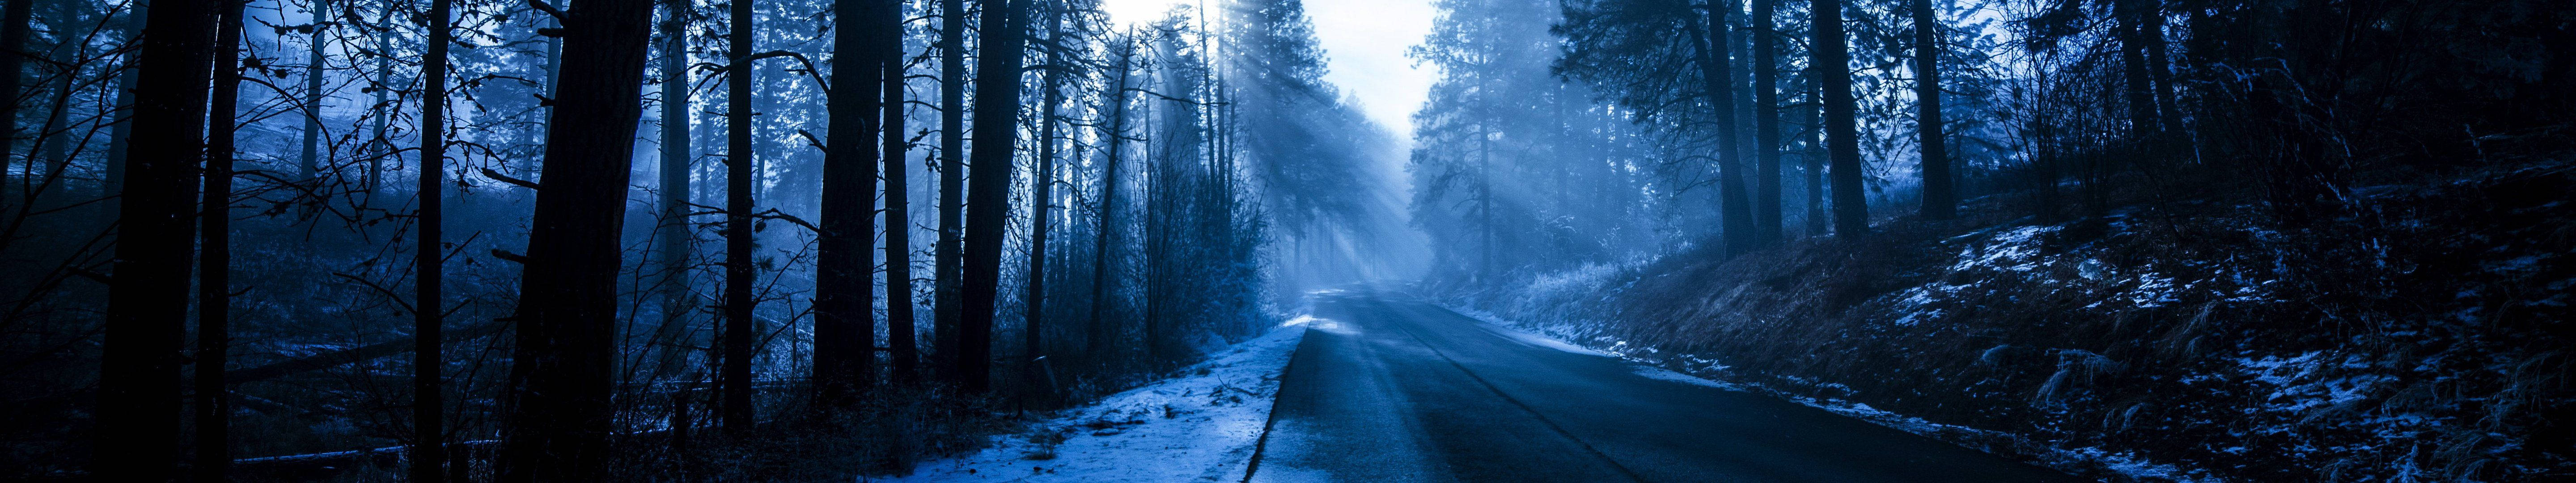 Take a dreamy walk through this picturesque Blue Aesthetic Forest Road. Wallpaper